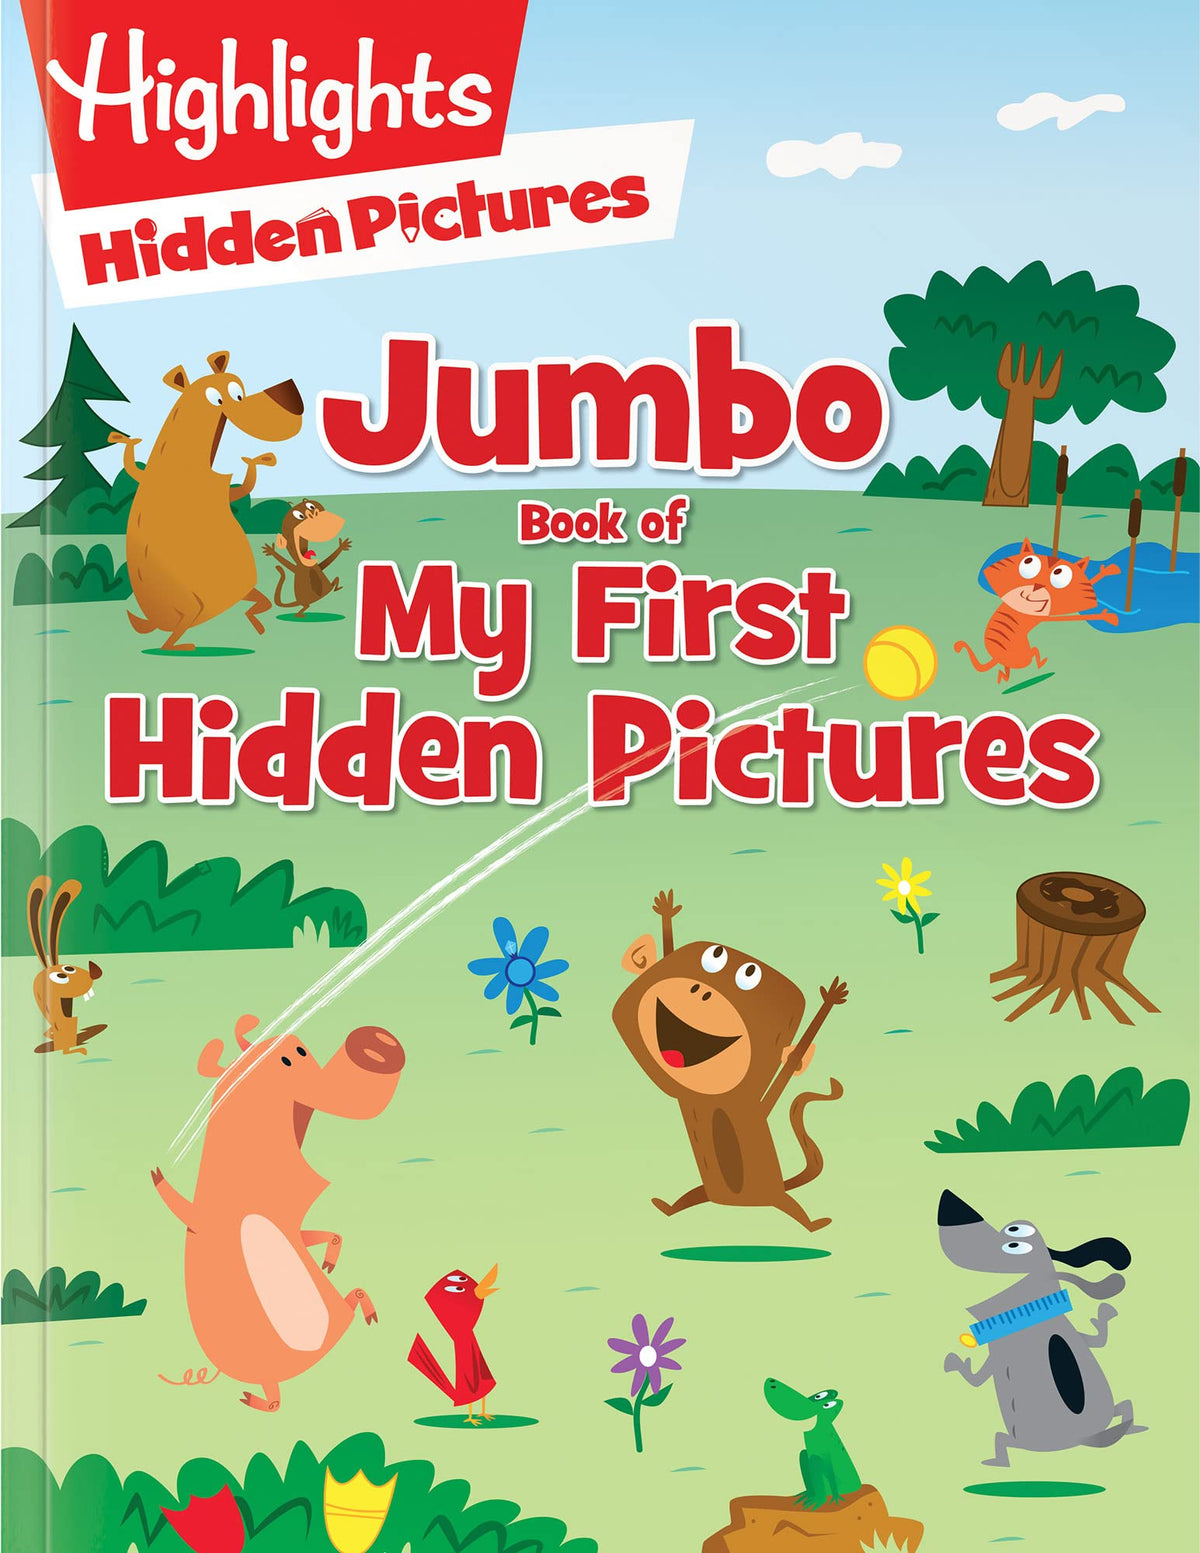 Highlights Jumbo Book of My First Hidden Pictures